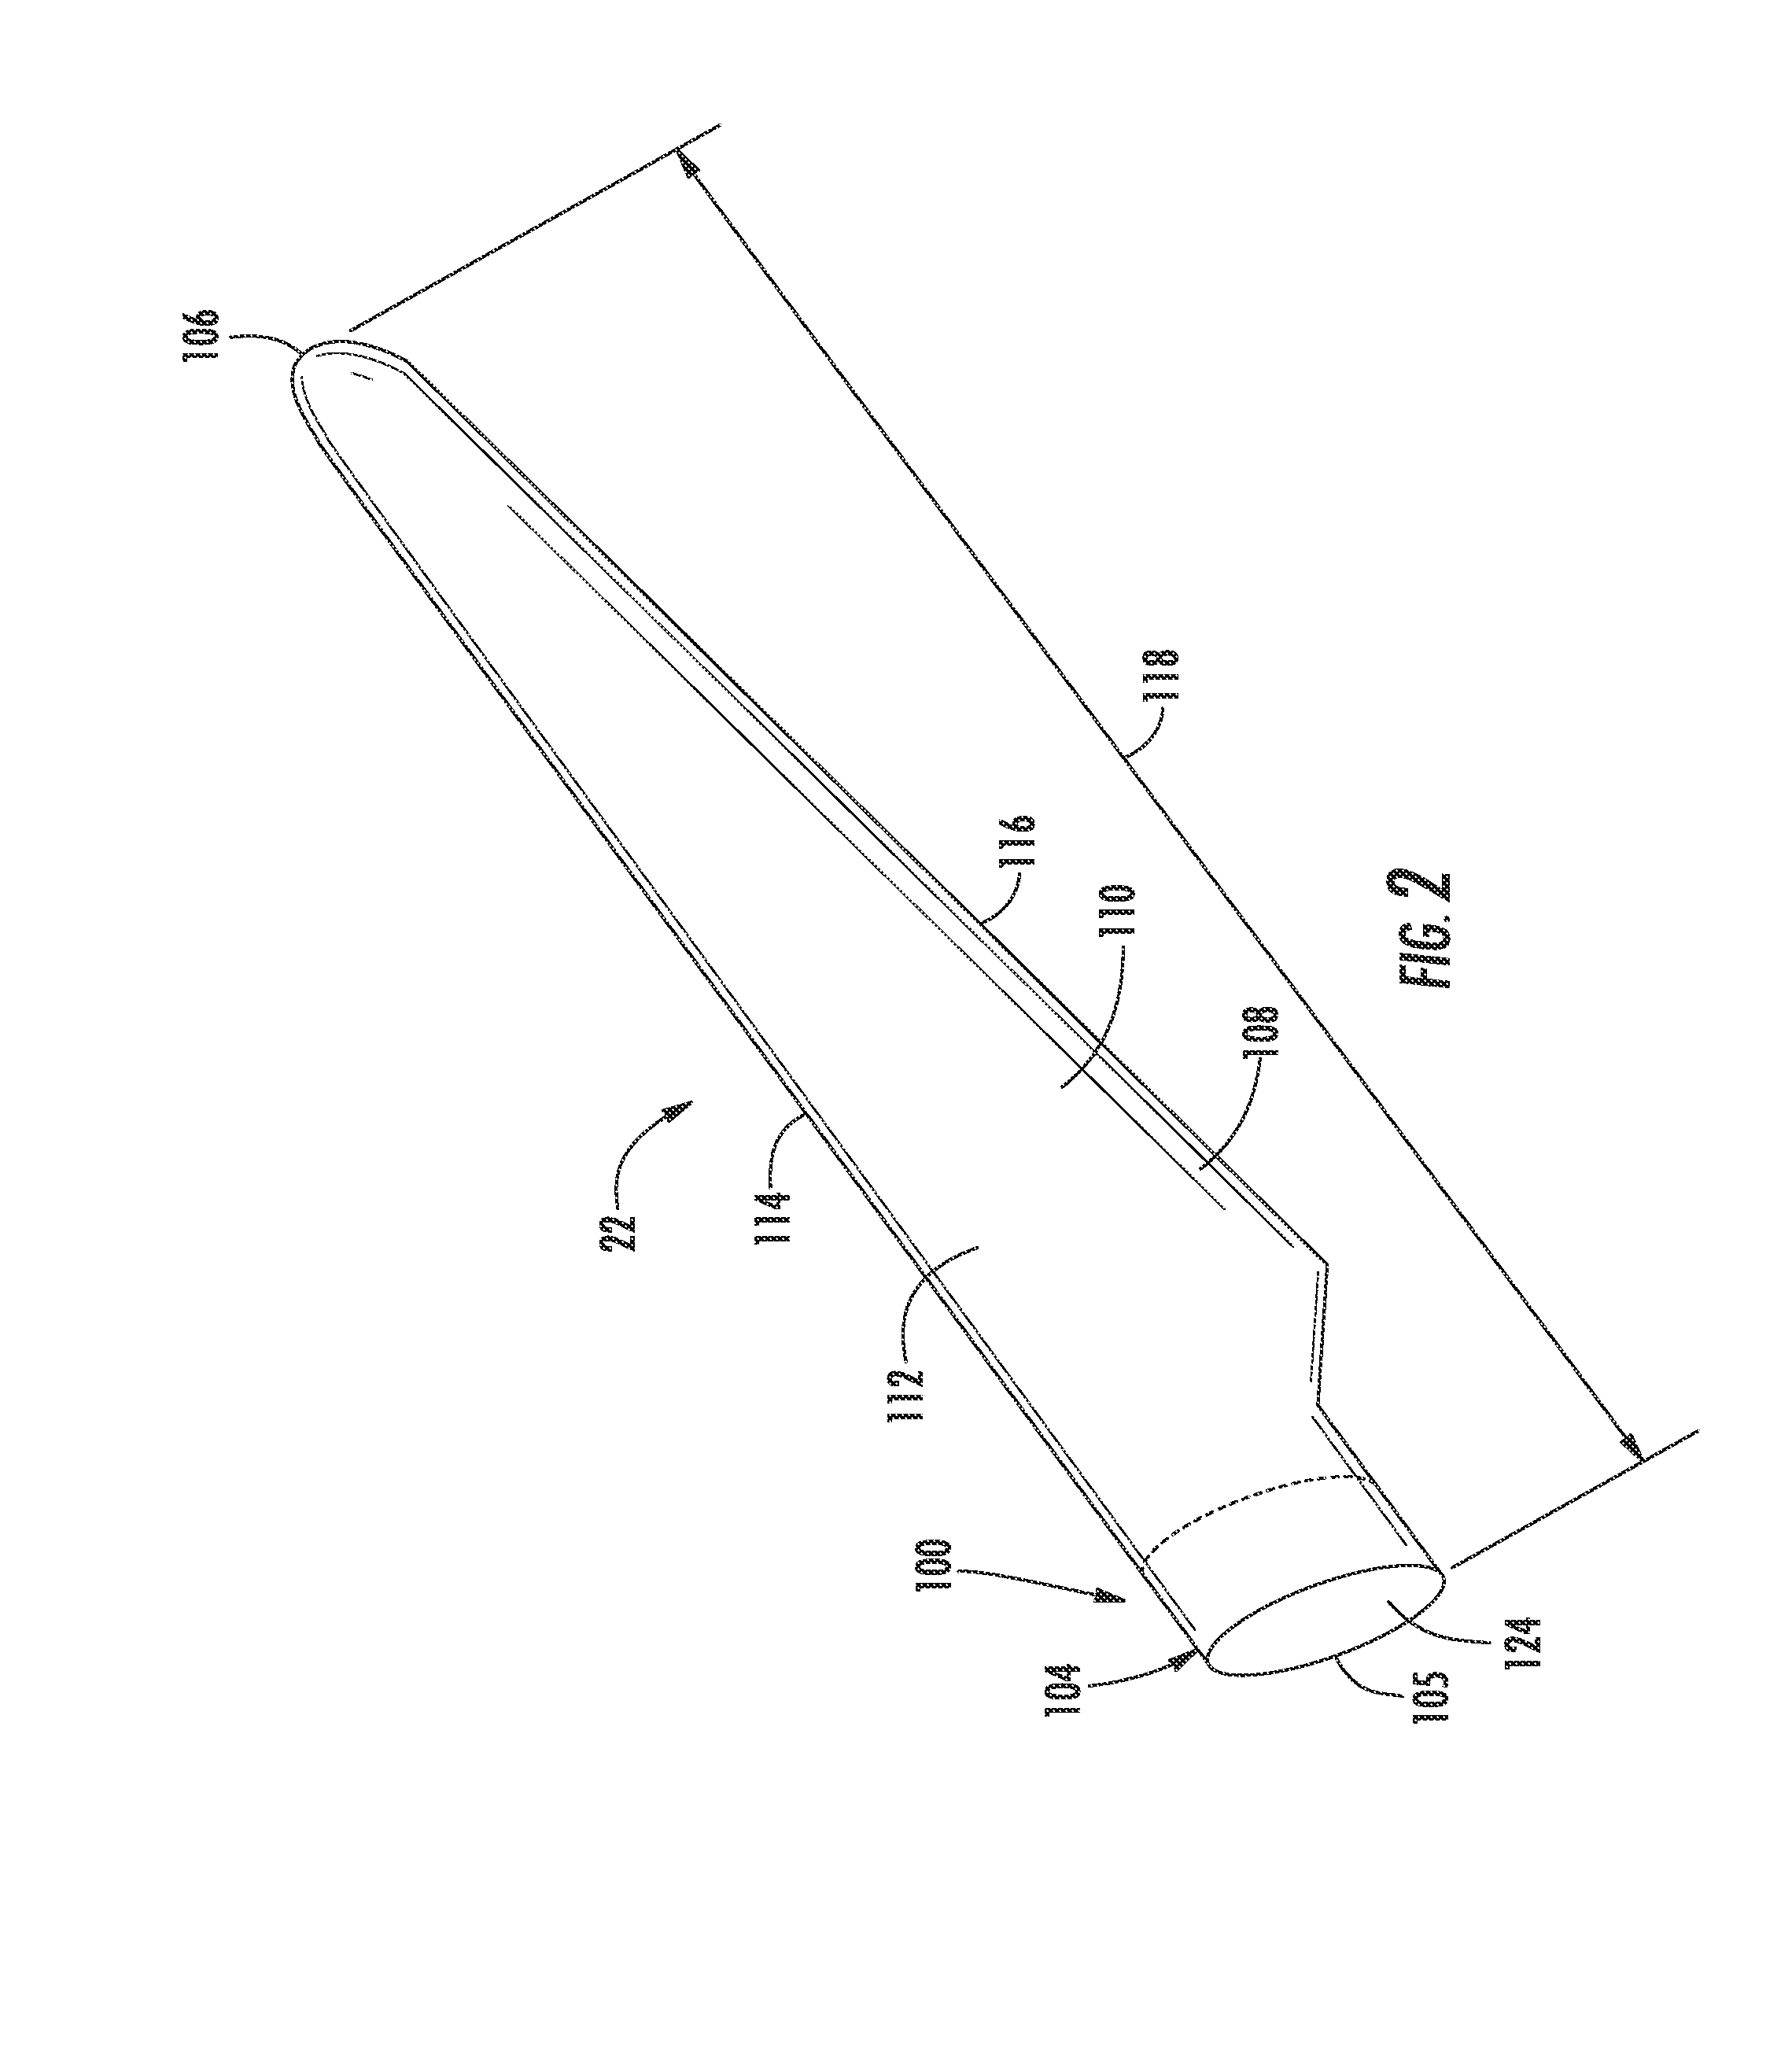 Rotor blade assembly having a stiffening root insert